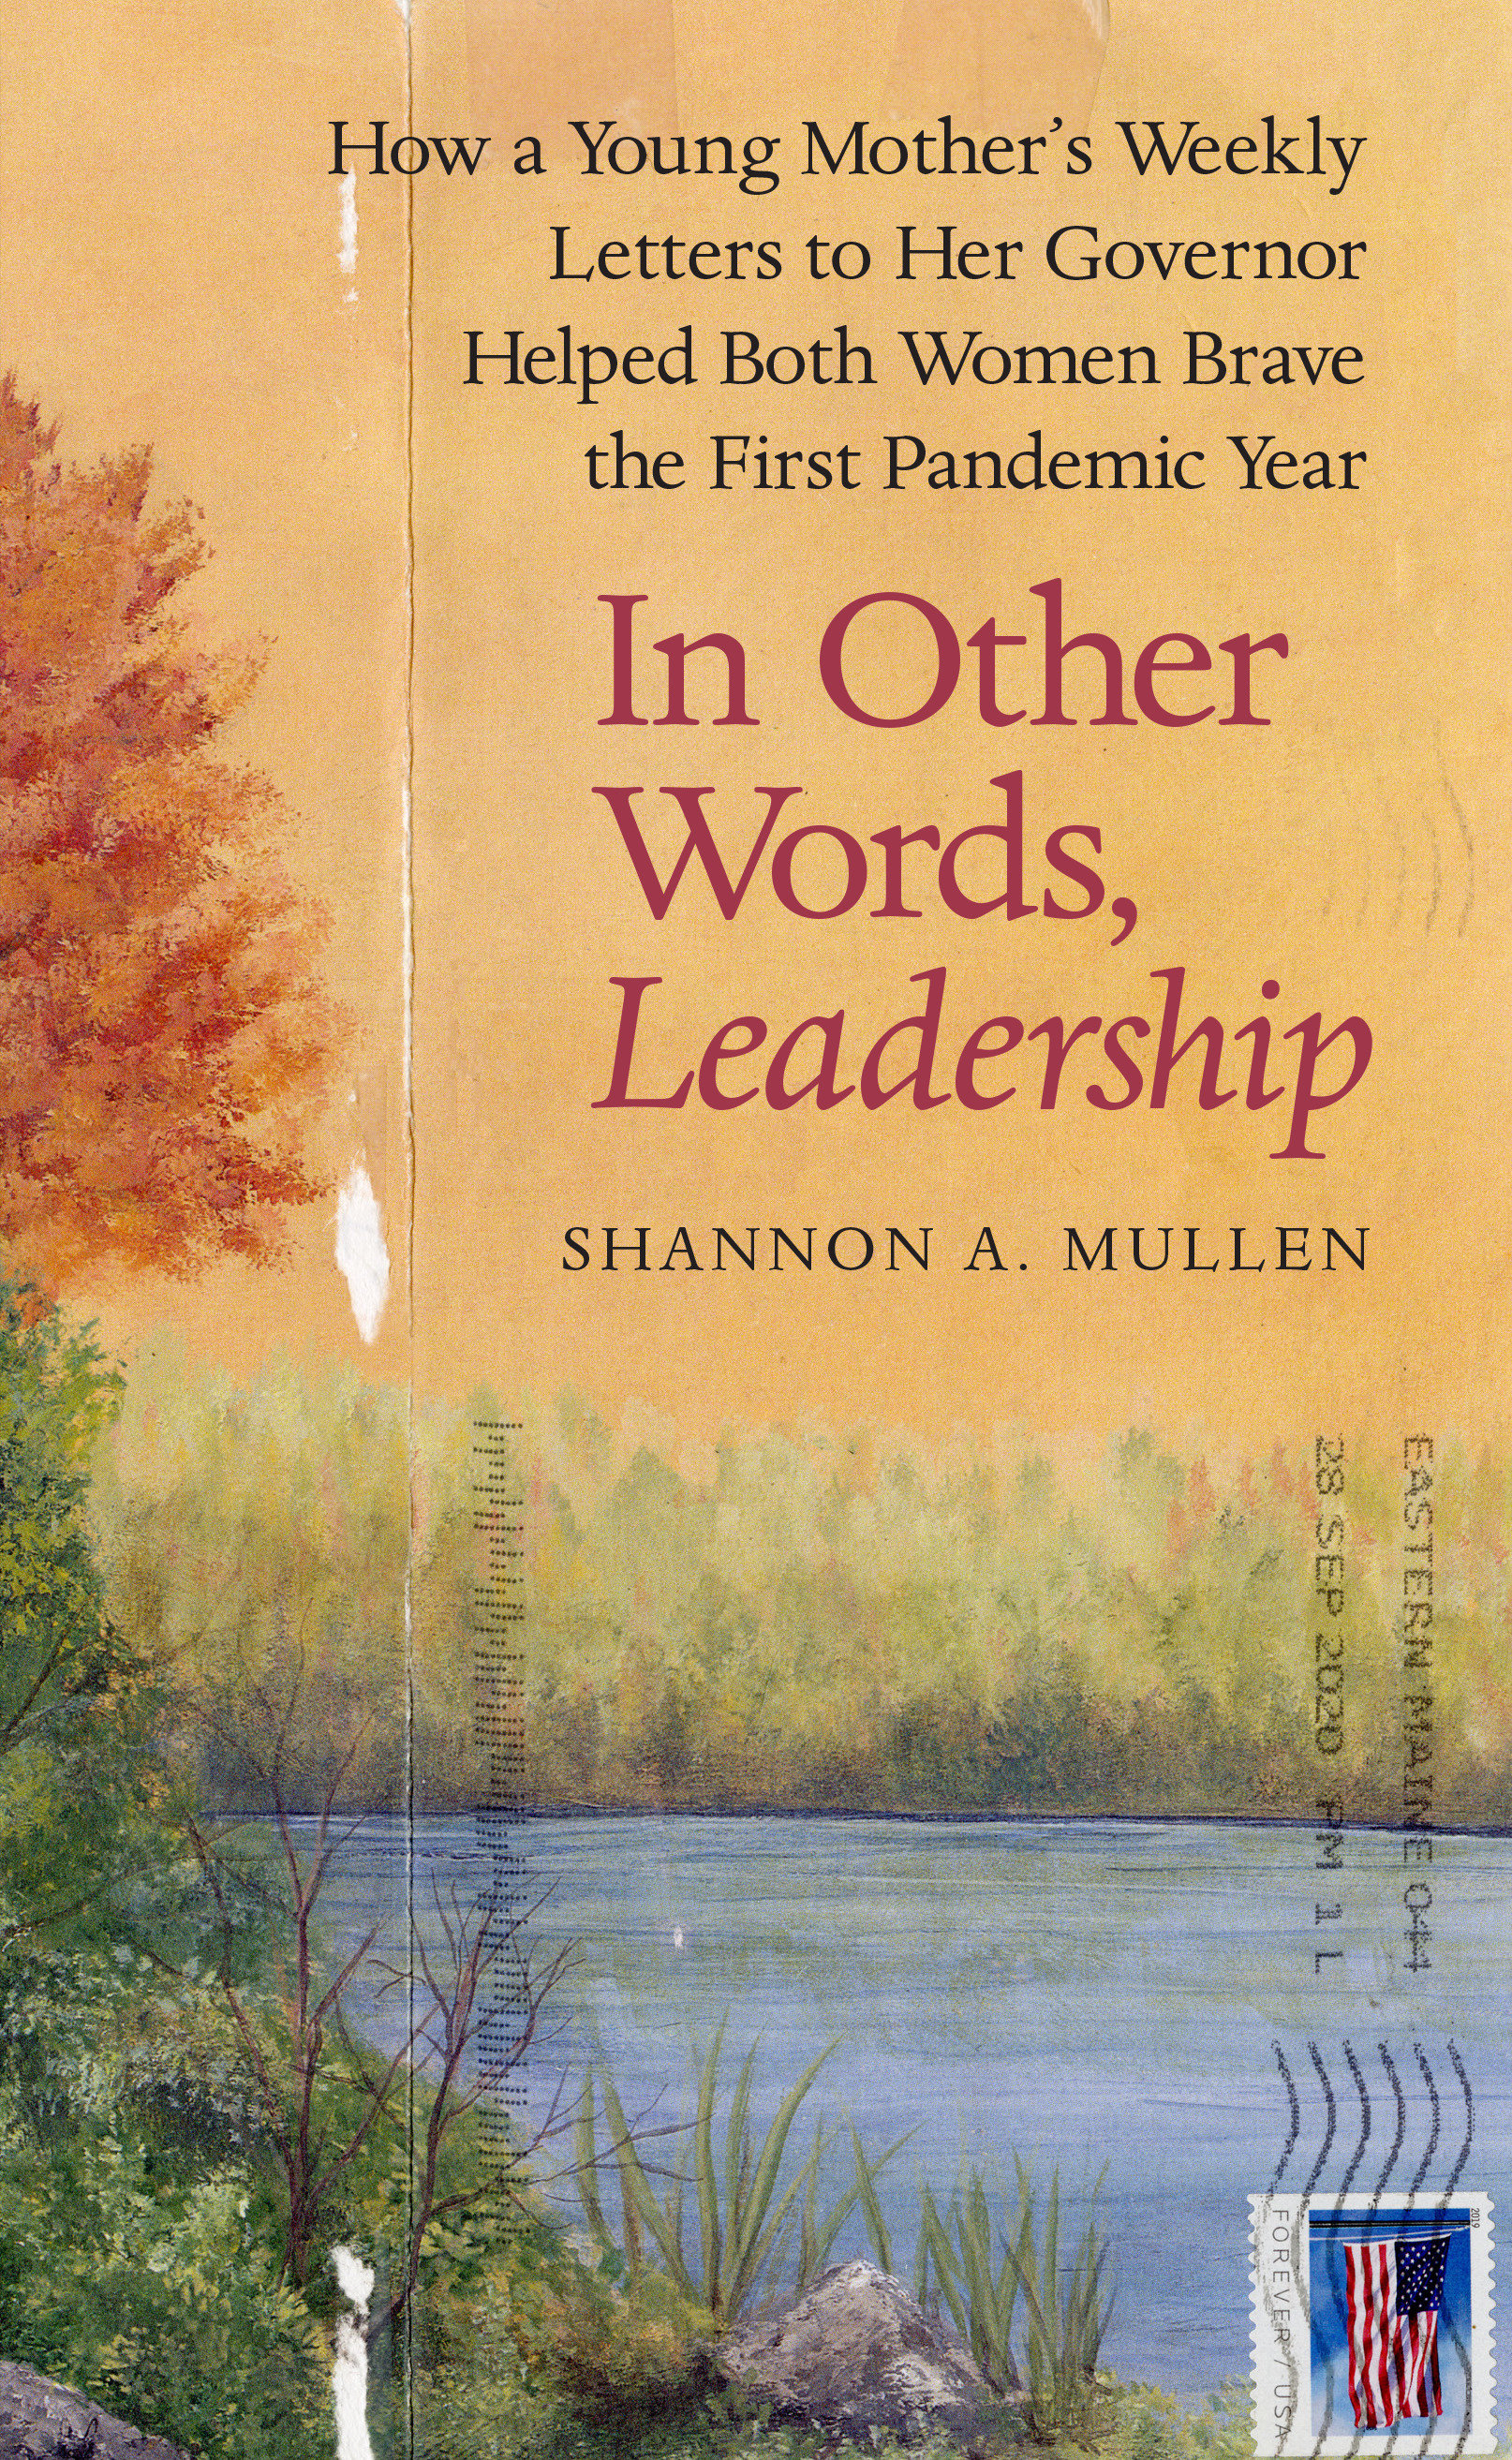 In Other Words, Leadership (Hardcover Book)